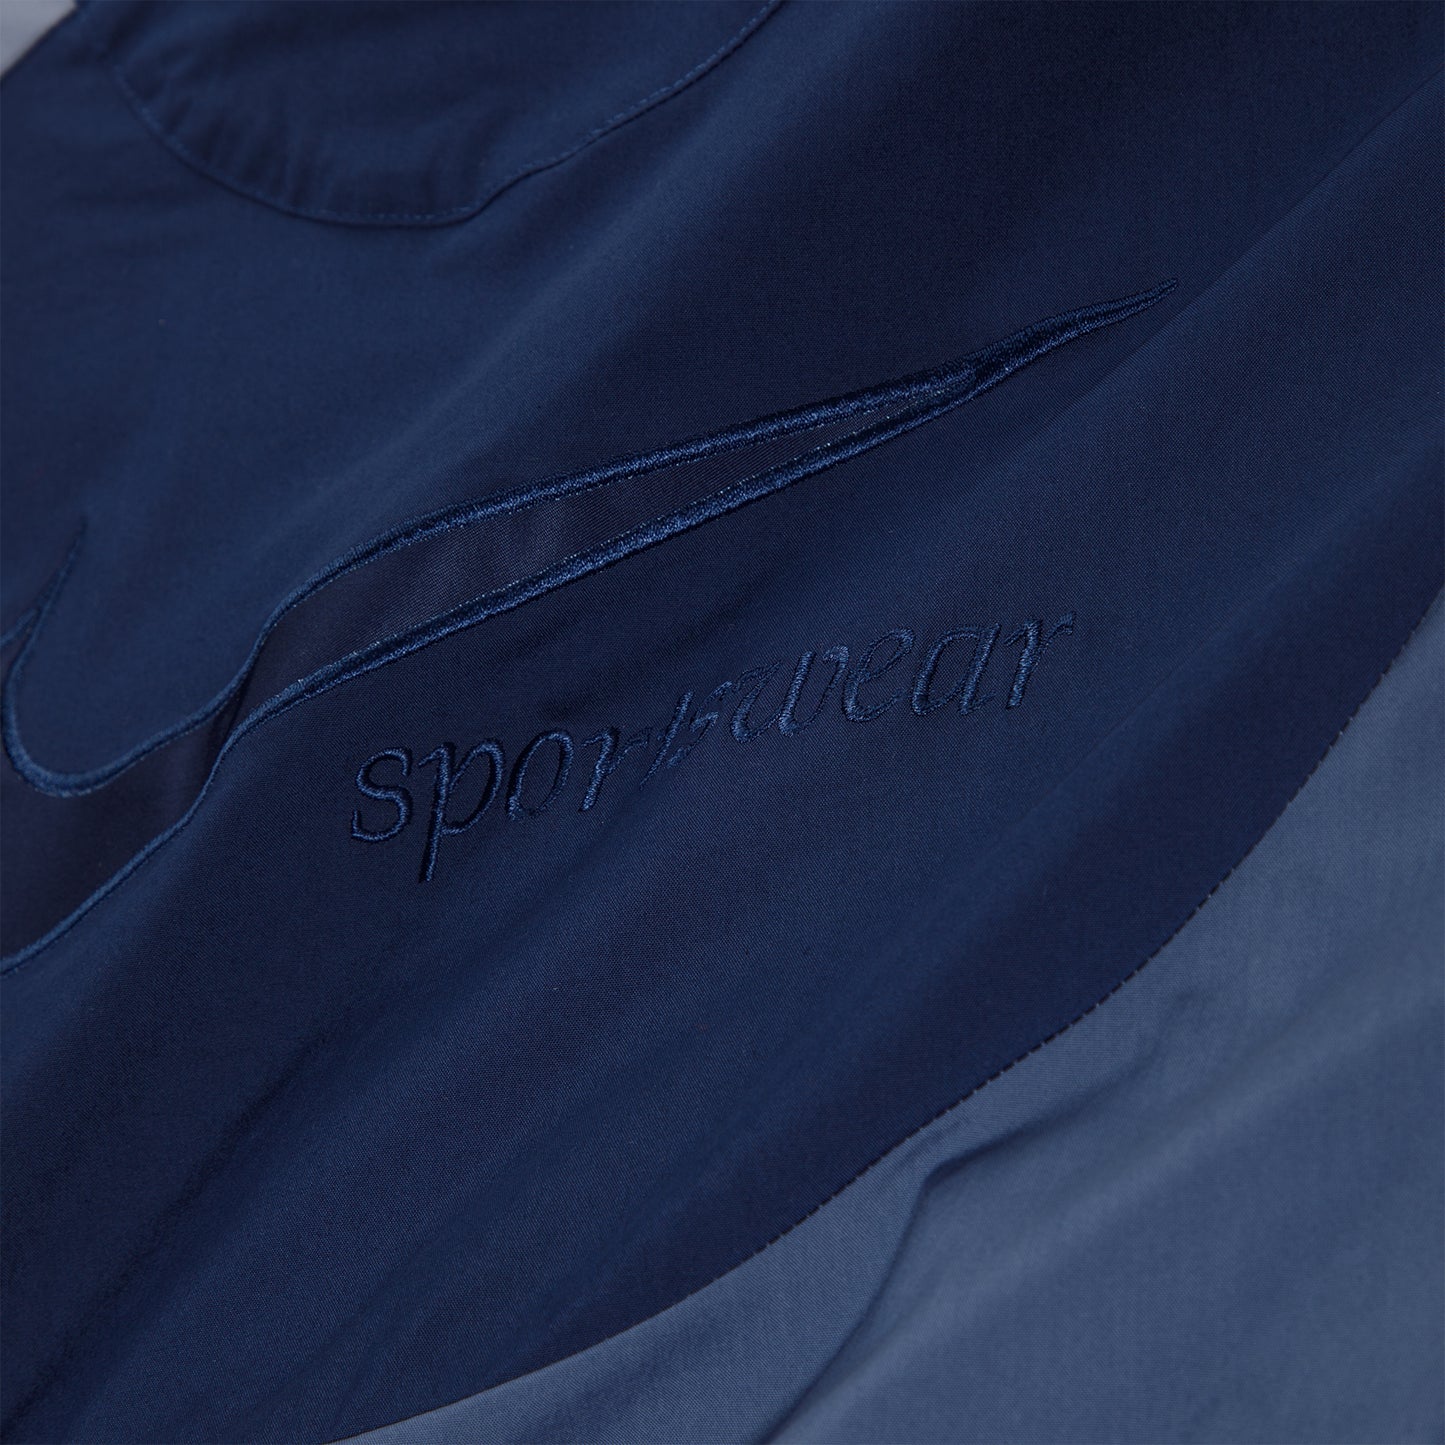 Nike Womens Sportswear Collection (Midnight Navy)